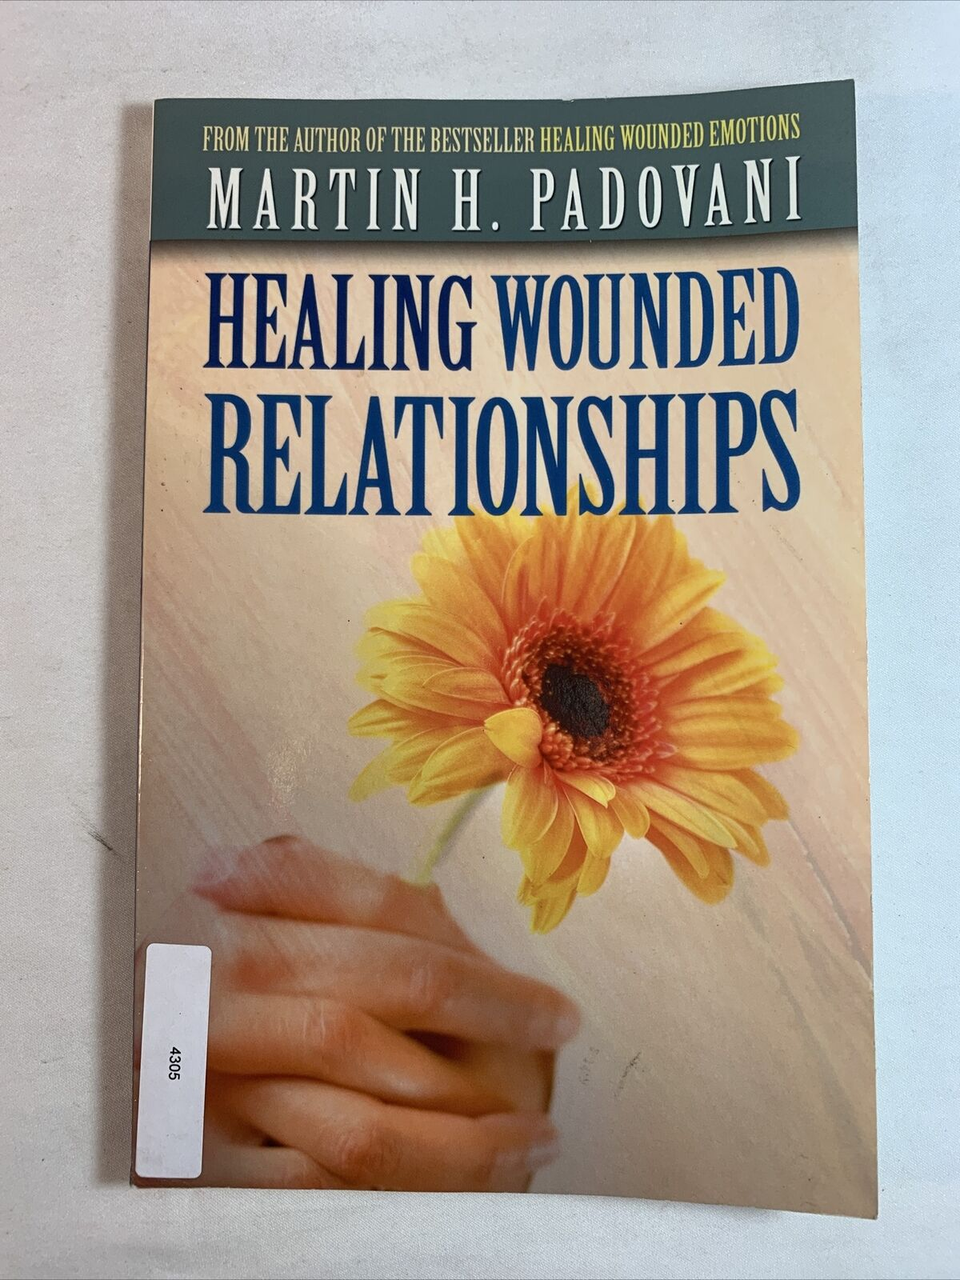 Healing Wounded Relationships by Martin H. Padovani